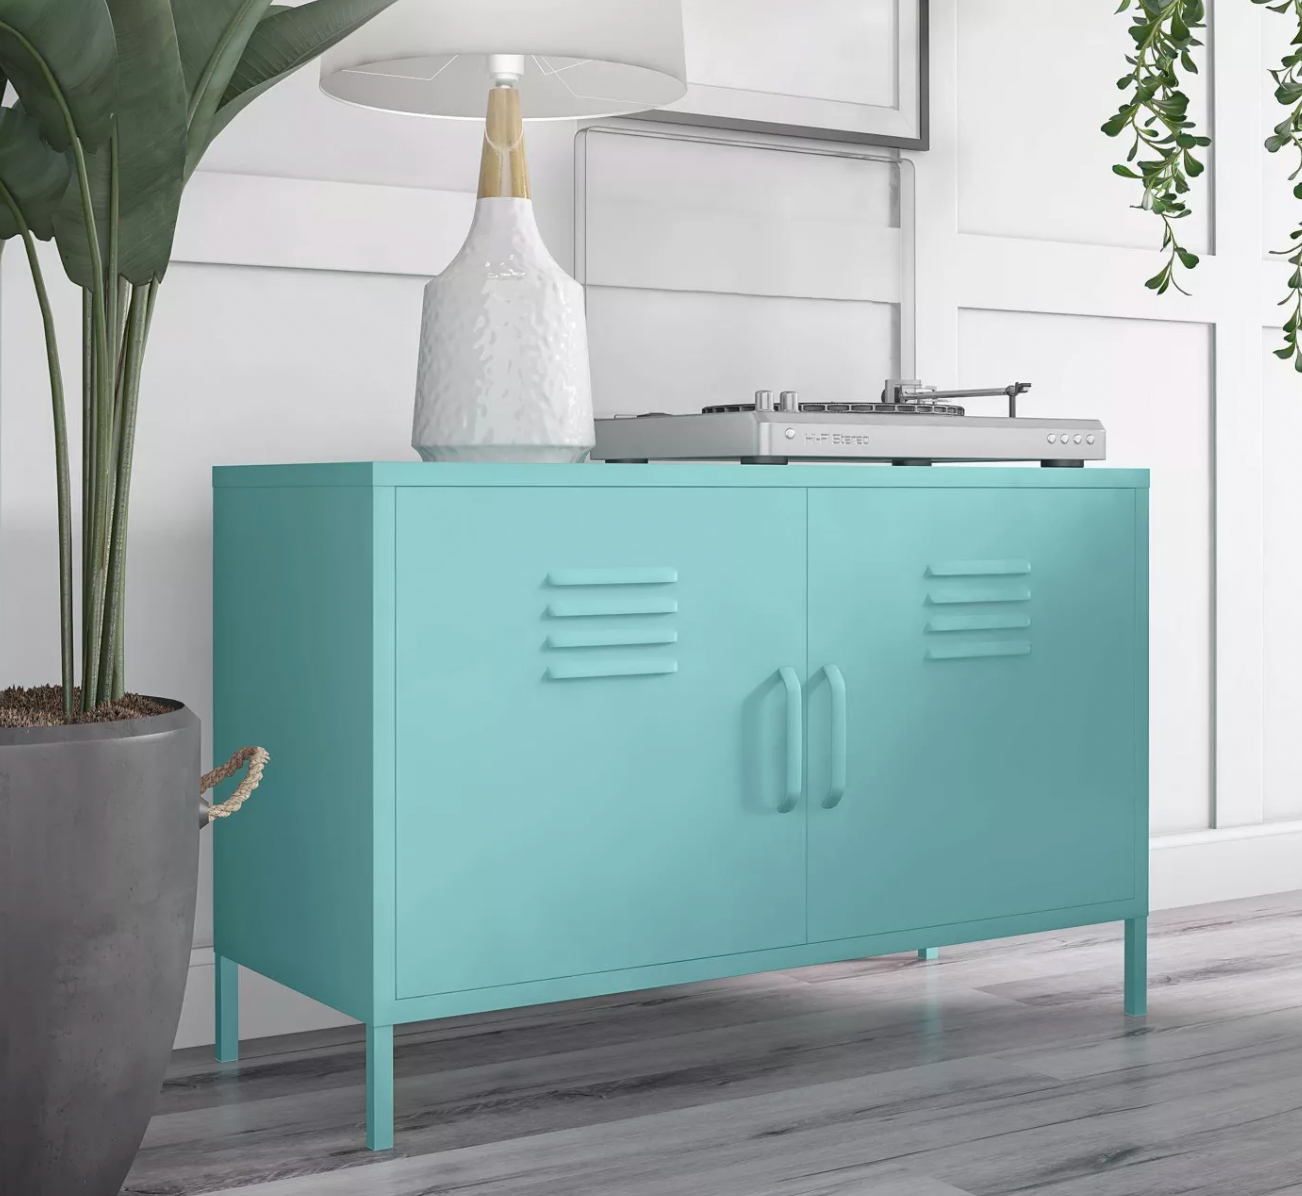 a turquoise locker-style cabinet with two doors